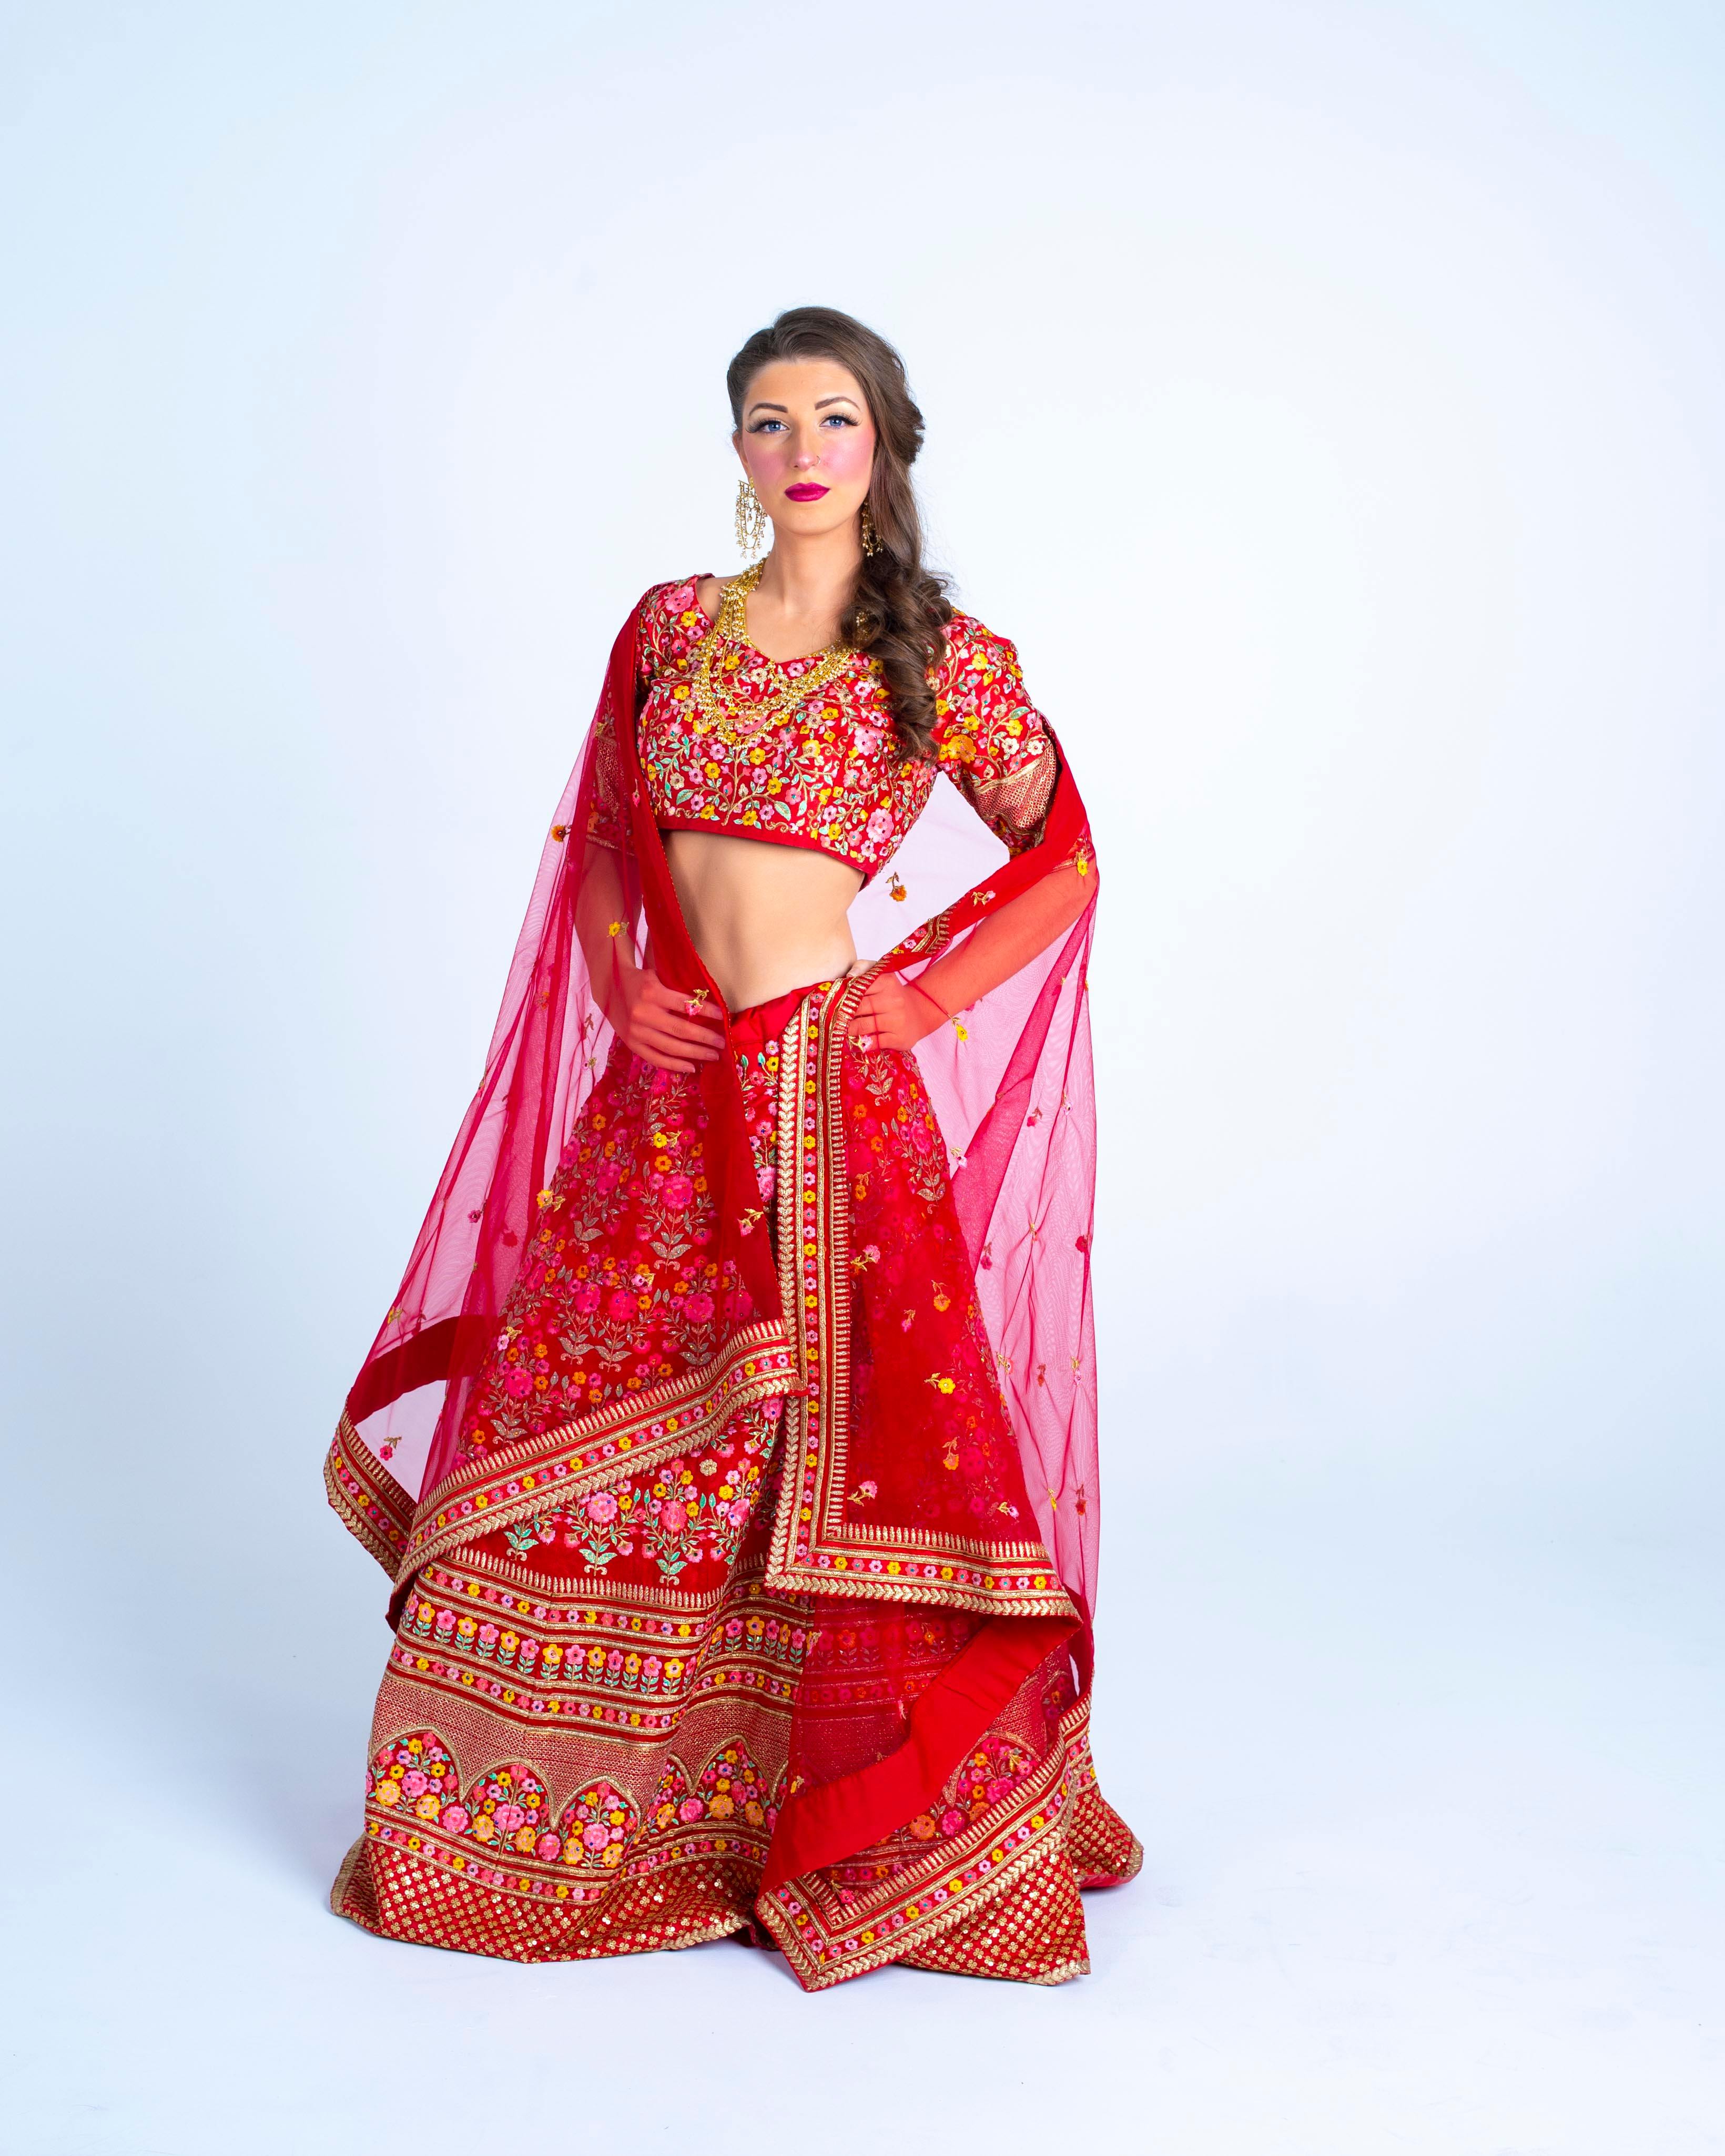 Indian Bridal Outfit Trends - Stunning Second Dupatta styles of 2020 to  make your Bridal Lehenga Pop! - Witty Vows